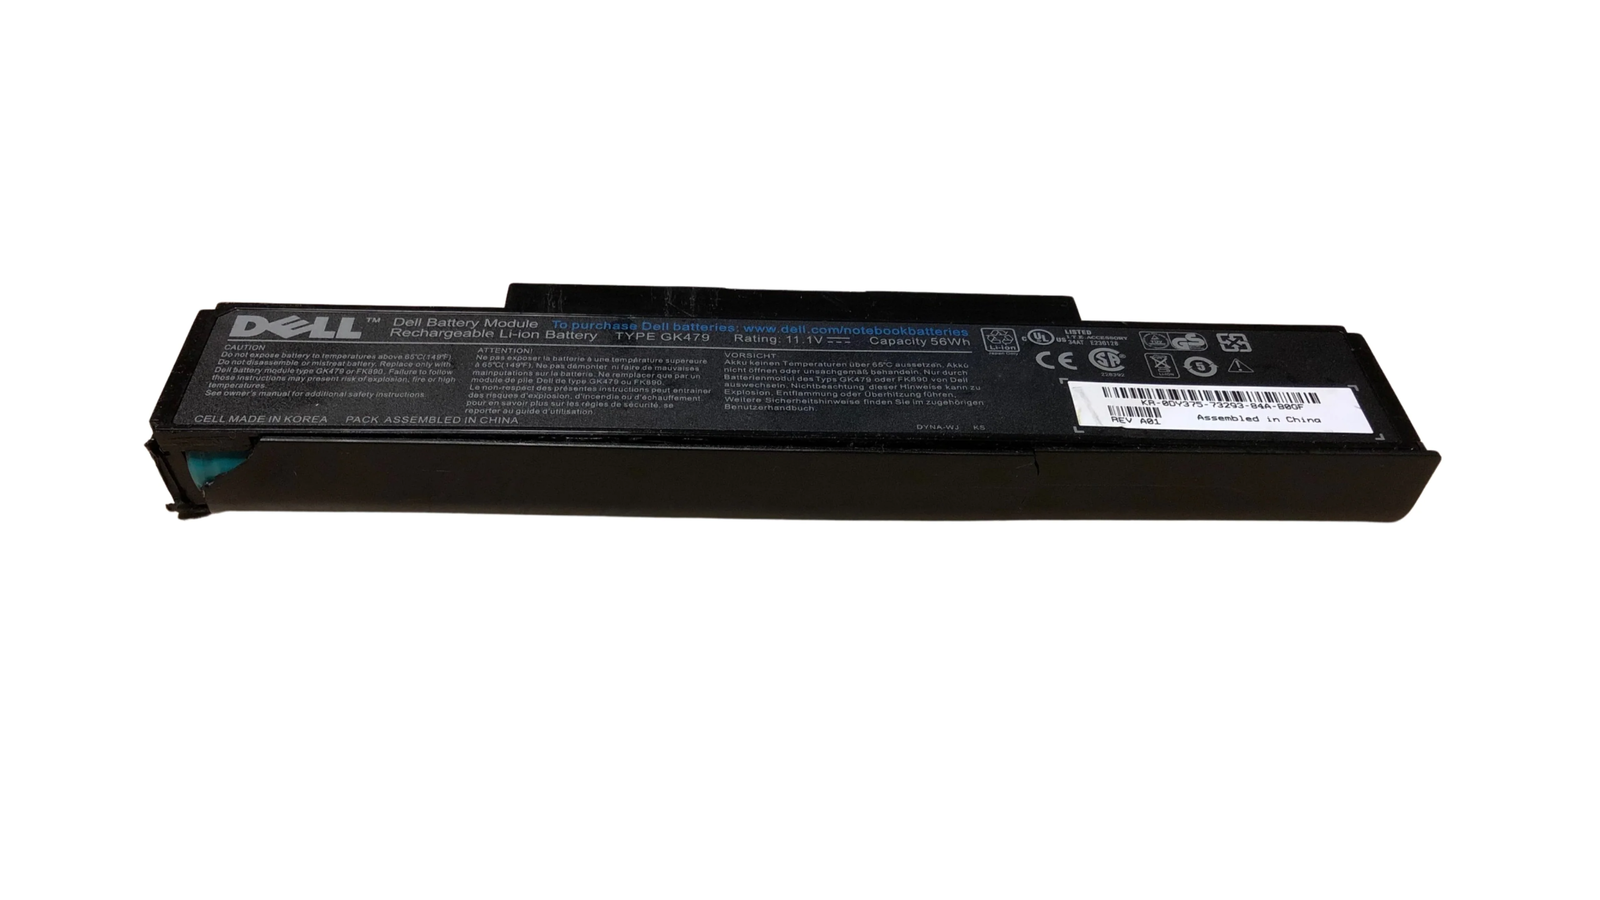 0DY375 BATTERY FOR DELL VOSTRO 1500